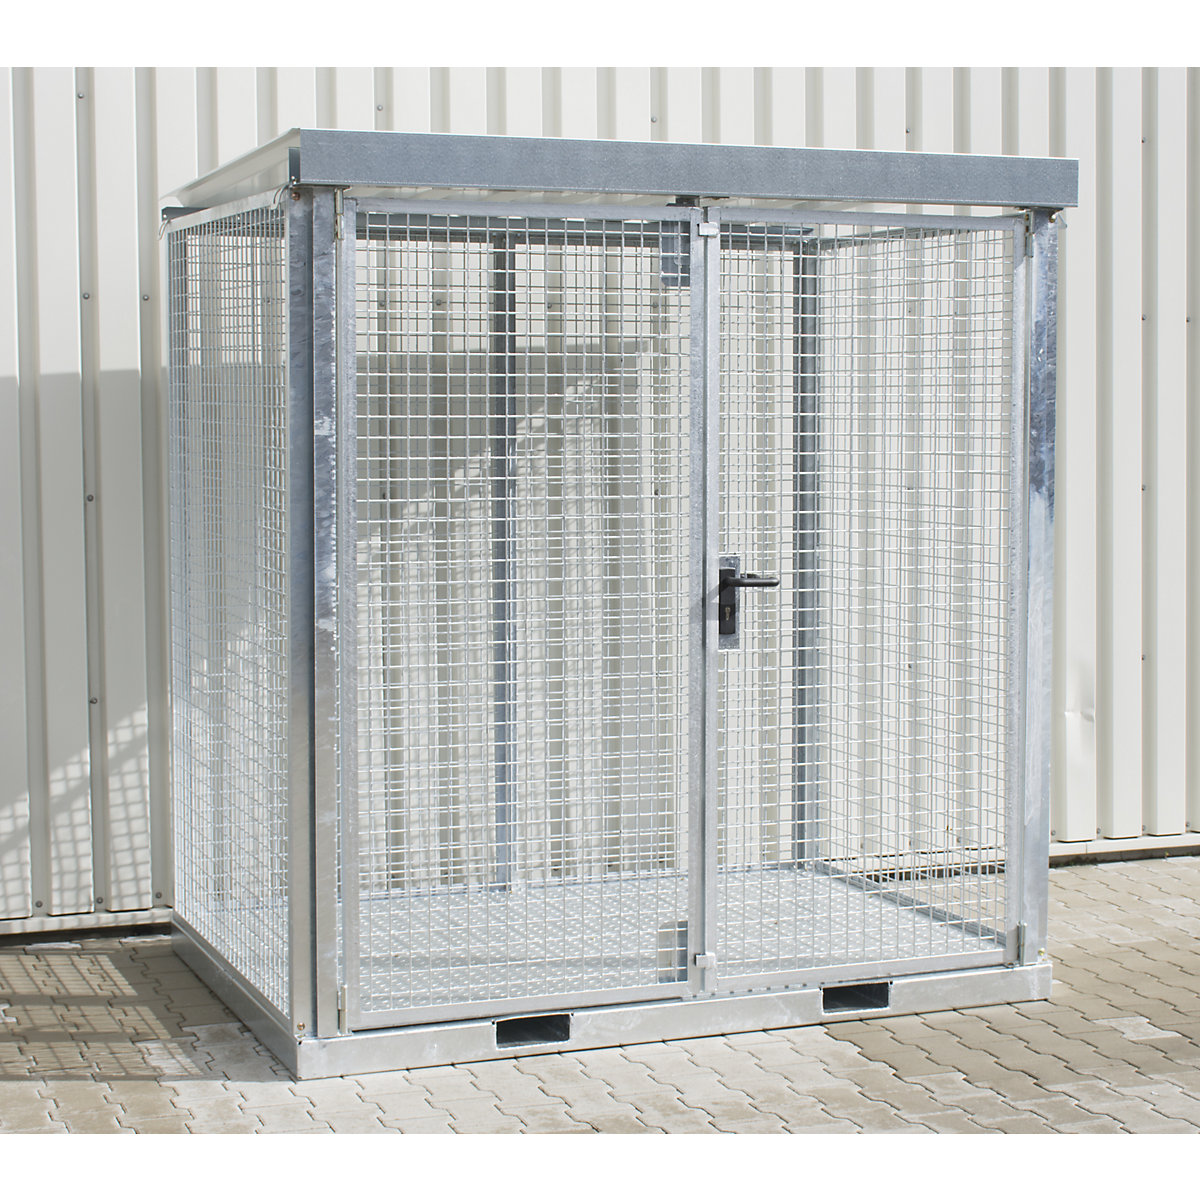 Assembled mesh gas cylinder cages – eurokraft pro, 45 cylinders with Ø 220 mm, ribbed sheet metal floor-5